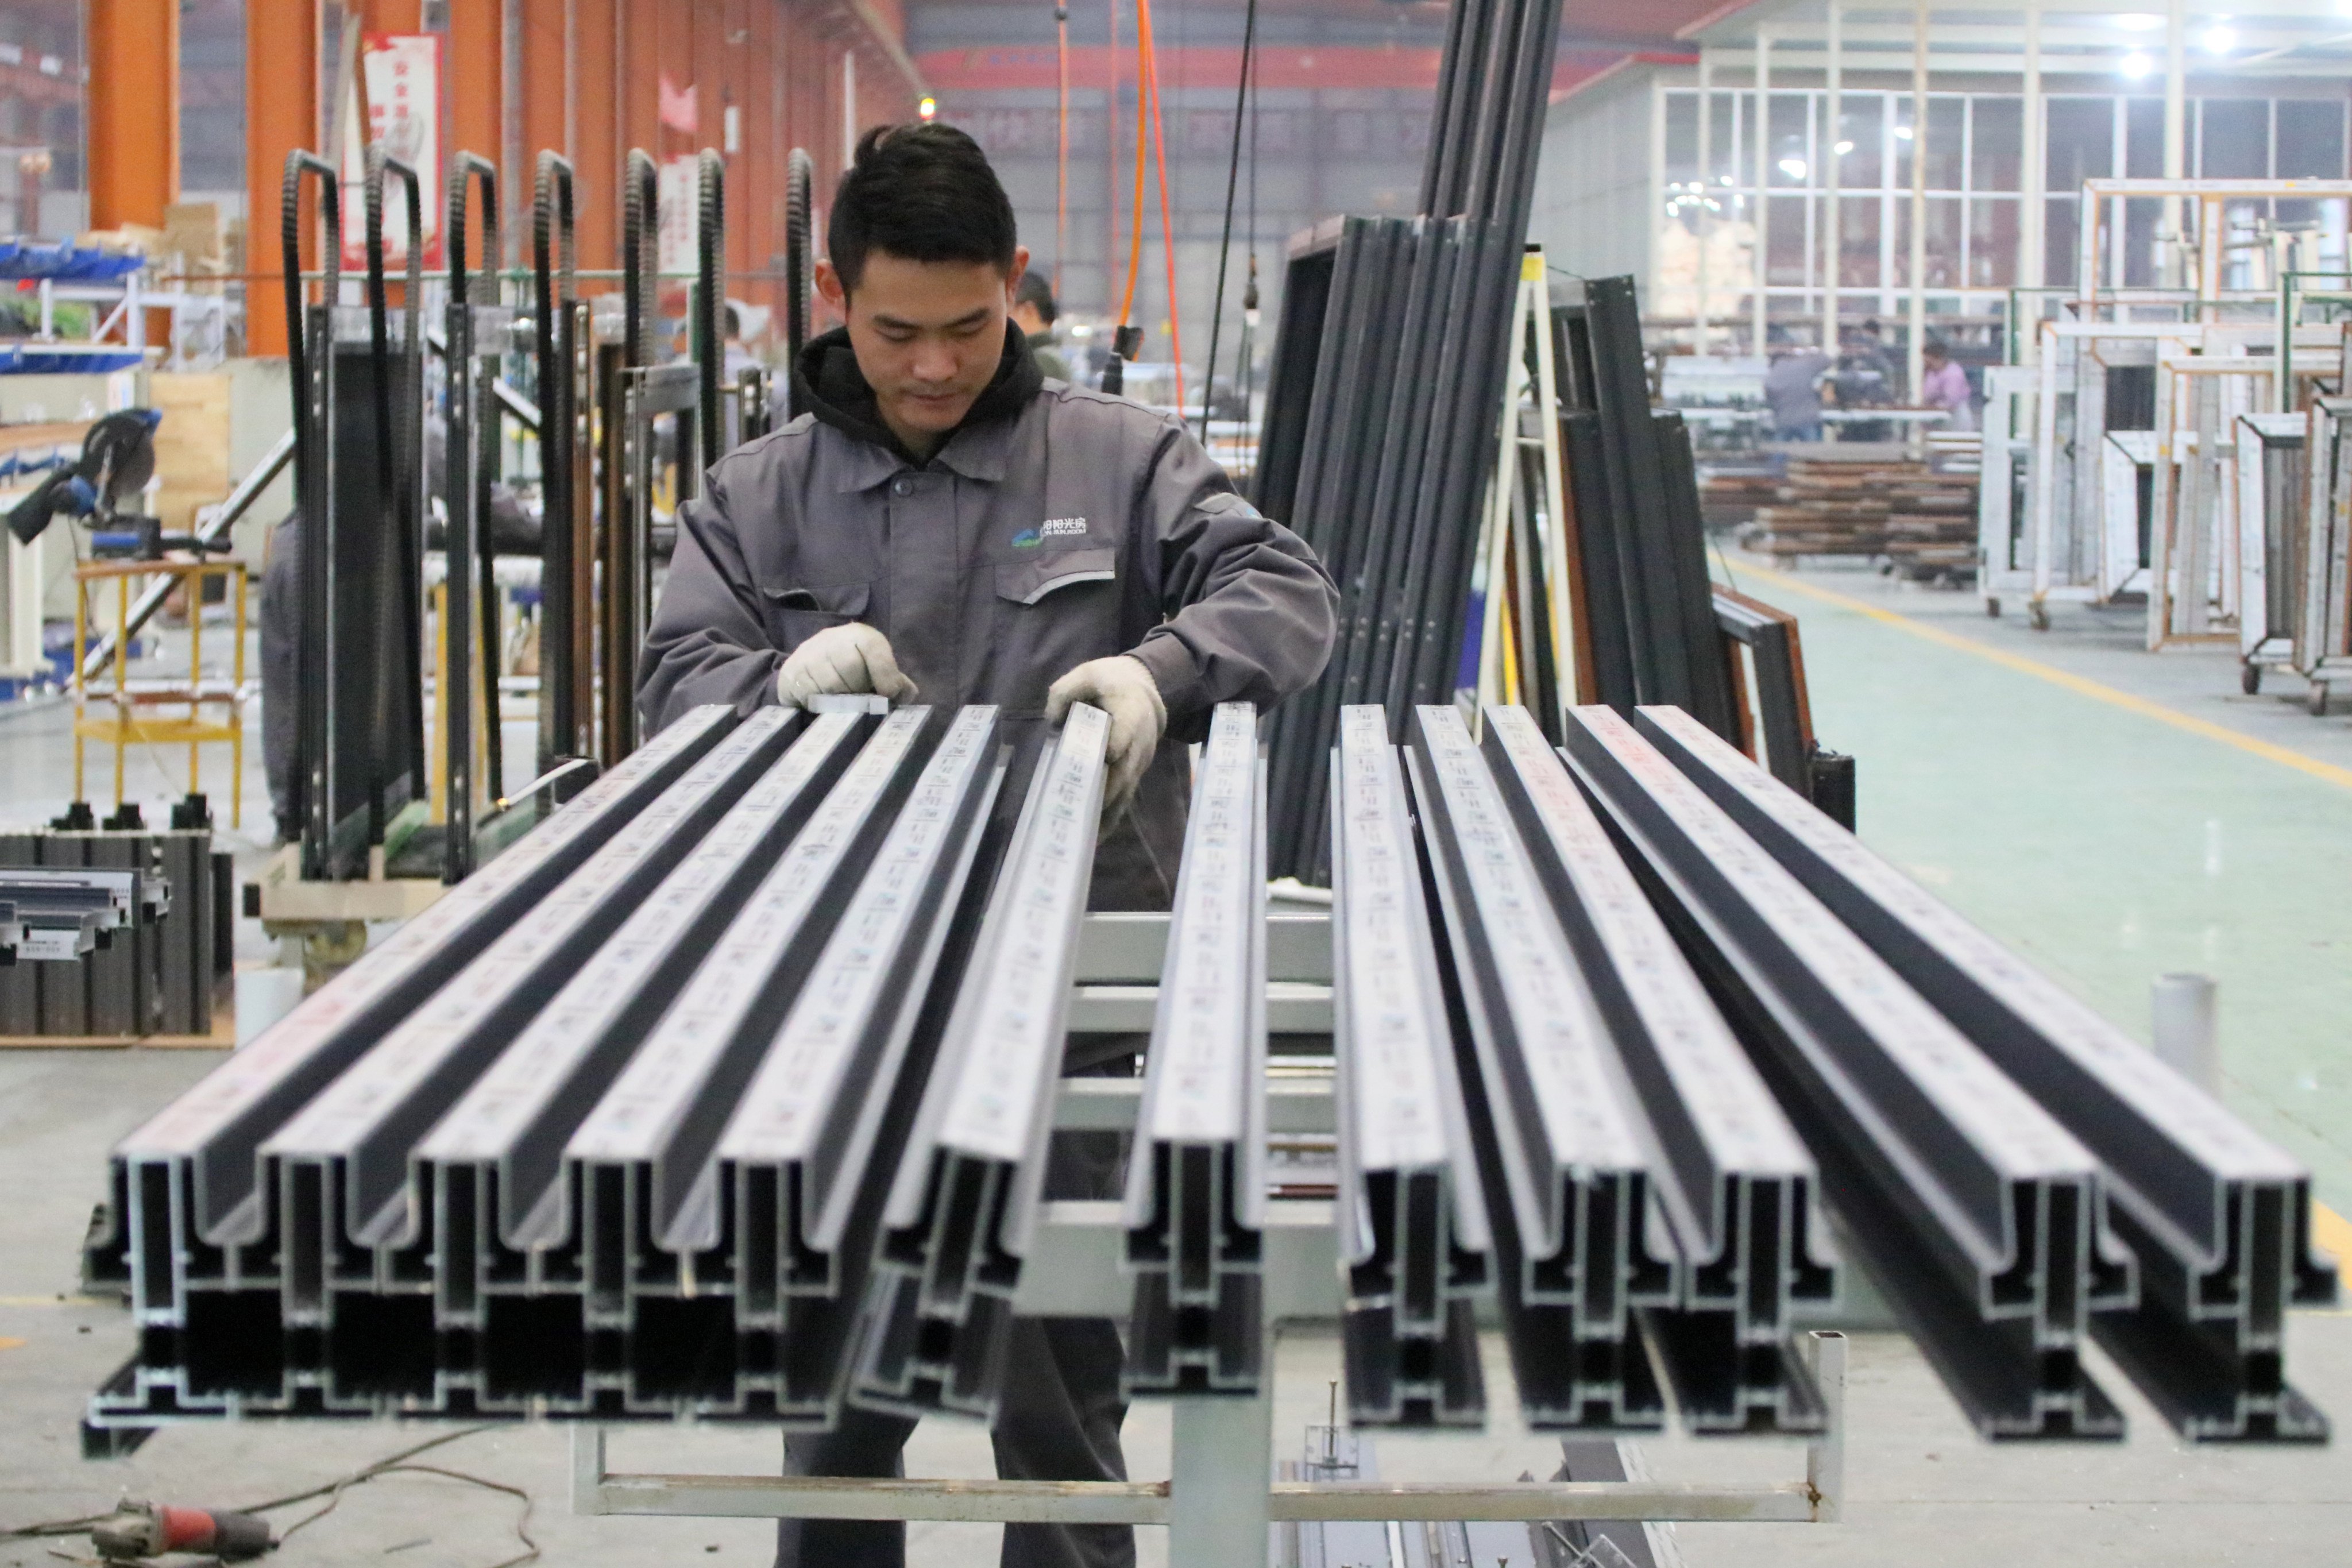 China’s official headline jobless data shows the situation has largely stabilised over the past few months, but there have been worrisome signs of lay-offs across industries from tech companies to manufacturers. Photo: VCG via Getty Images
